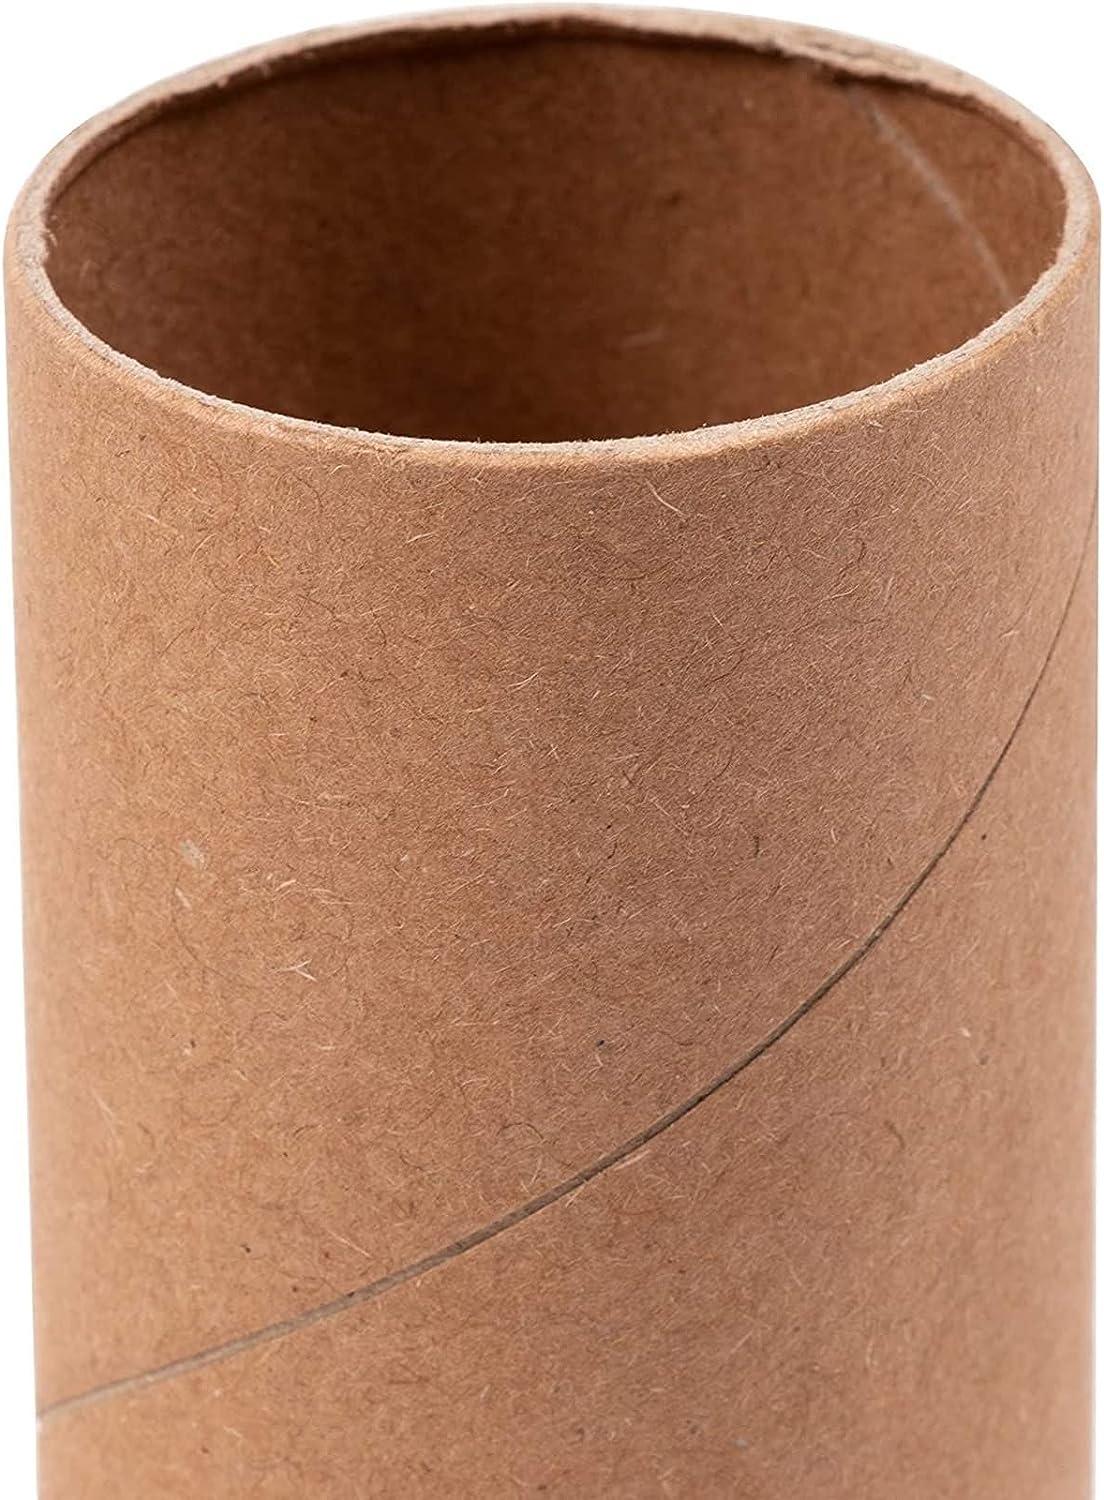 48 Pack Empty Toilet Paper Rolls for Crafts, Brown Cardboard Tubes for DIY,  Classrooms, Dioramas (1.6 x 3.95 in)